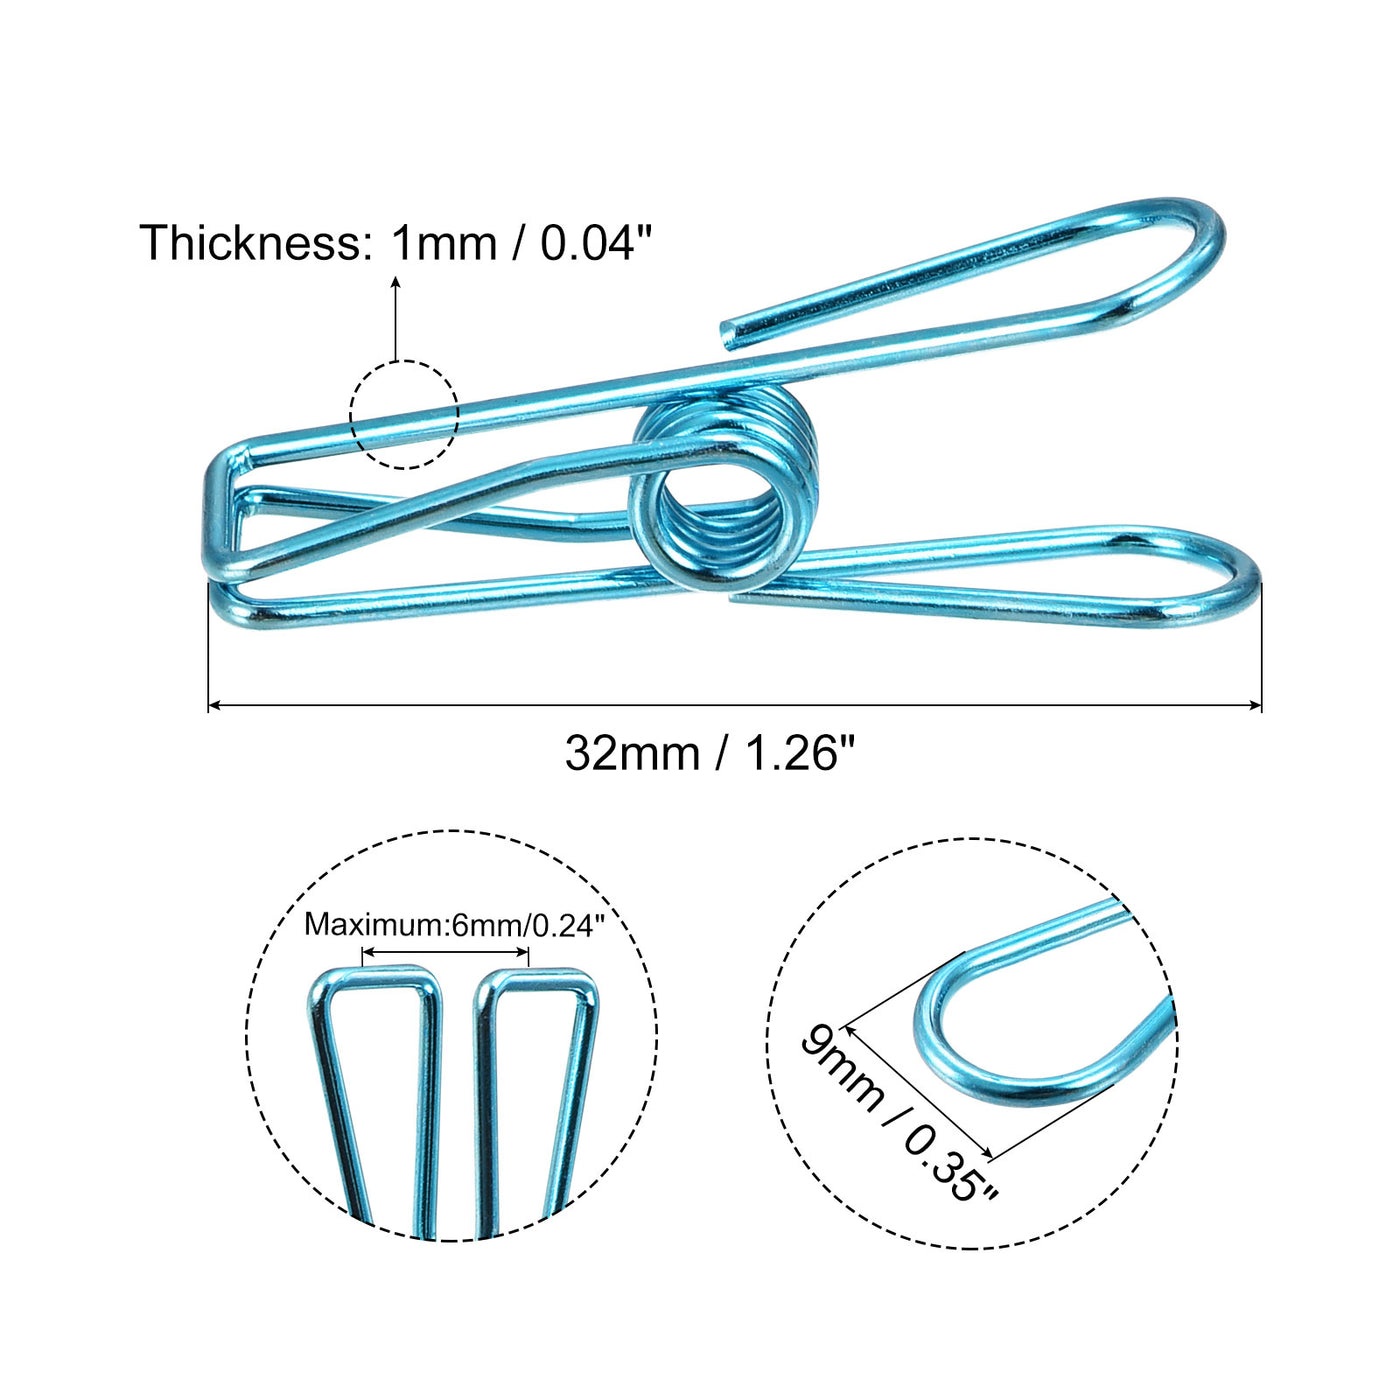 uxcell Uxcell Tablecloth Clips, 32mm Carbon Steel Clamps for Fixing Table Cloth, Blue 8 Pcs